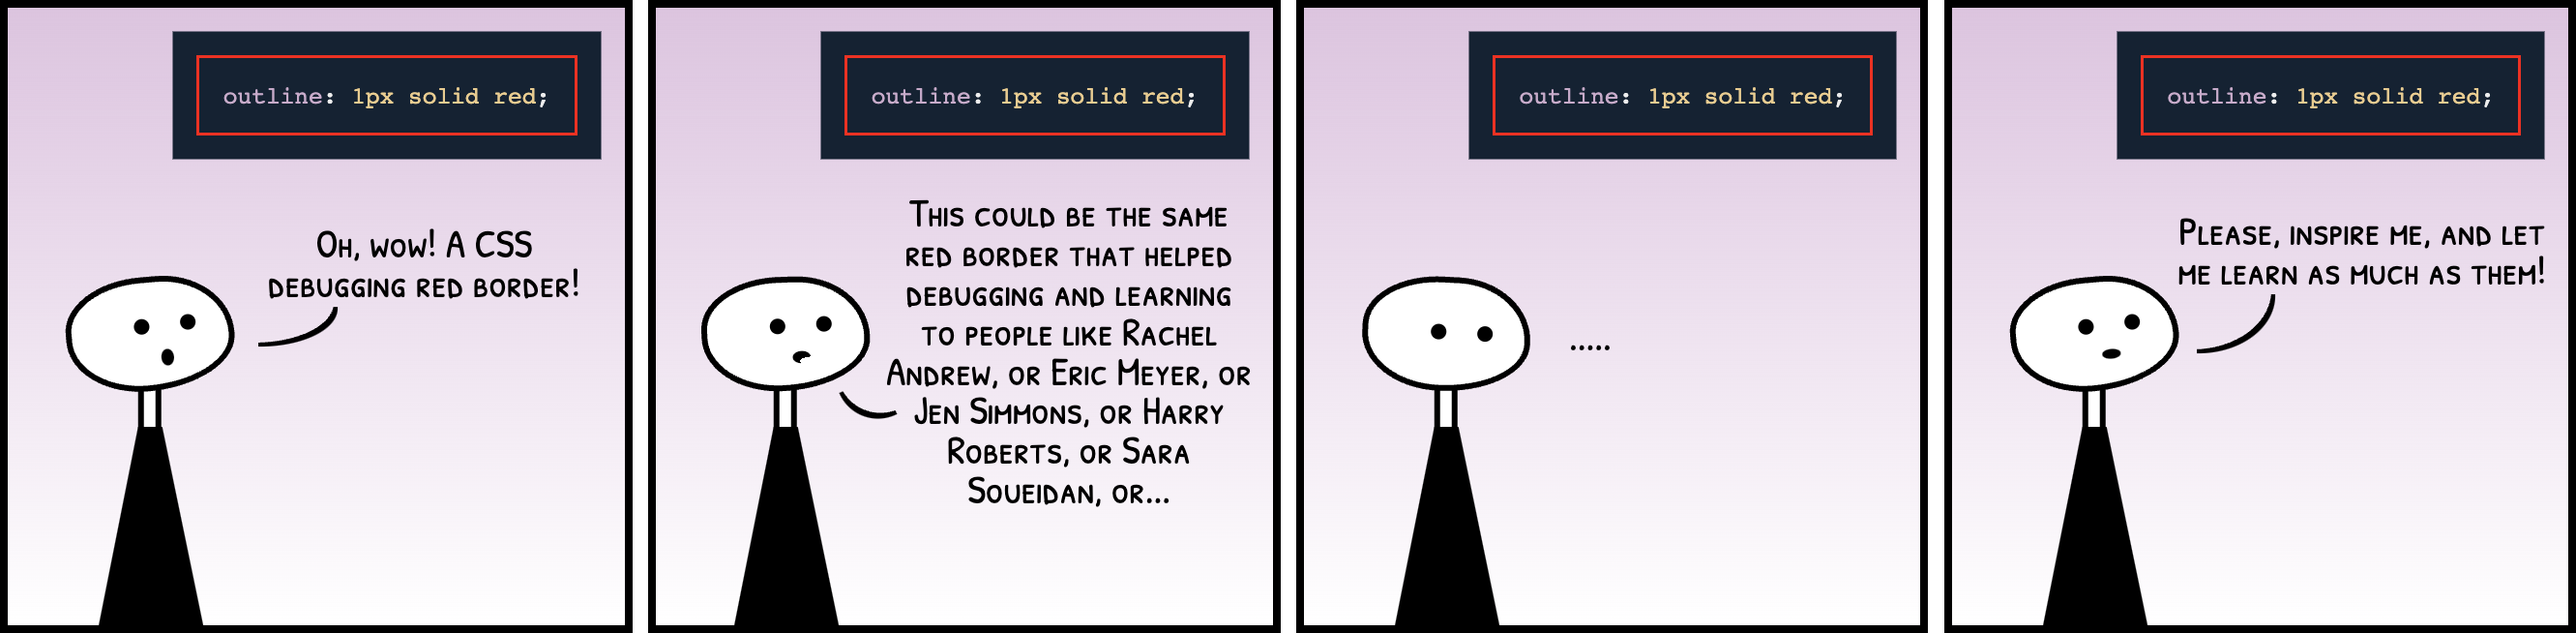 Comic strip with 4 panels. A figure walks into a CSS code that generates a red border and exclaims 'oh, wow! a CSS debugging red border!' Then adds 'This could be the same red border that helped debugging and learning to people like Rachel Andrew, or Eric Meyer, or Jen Simmons, or Harry Roberts, or Sara Soueidan, or...'. In the third panel, the character remains silent thinking. And finally pleads 'Please, red border, inspire me, and let me learn as much as them!'